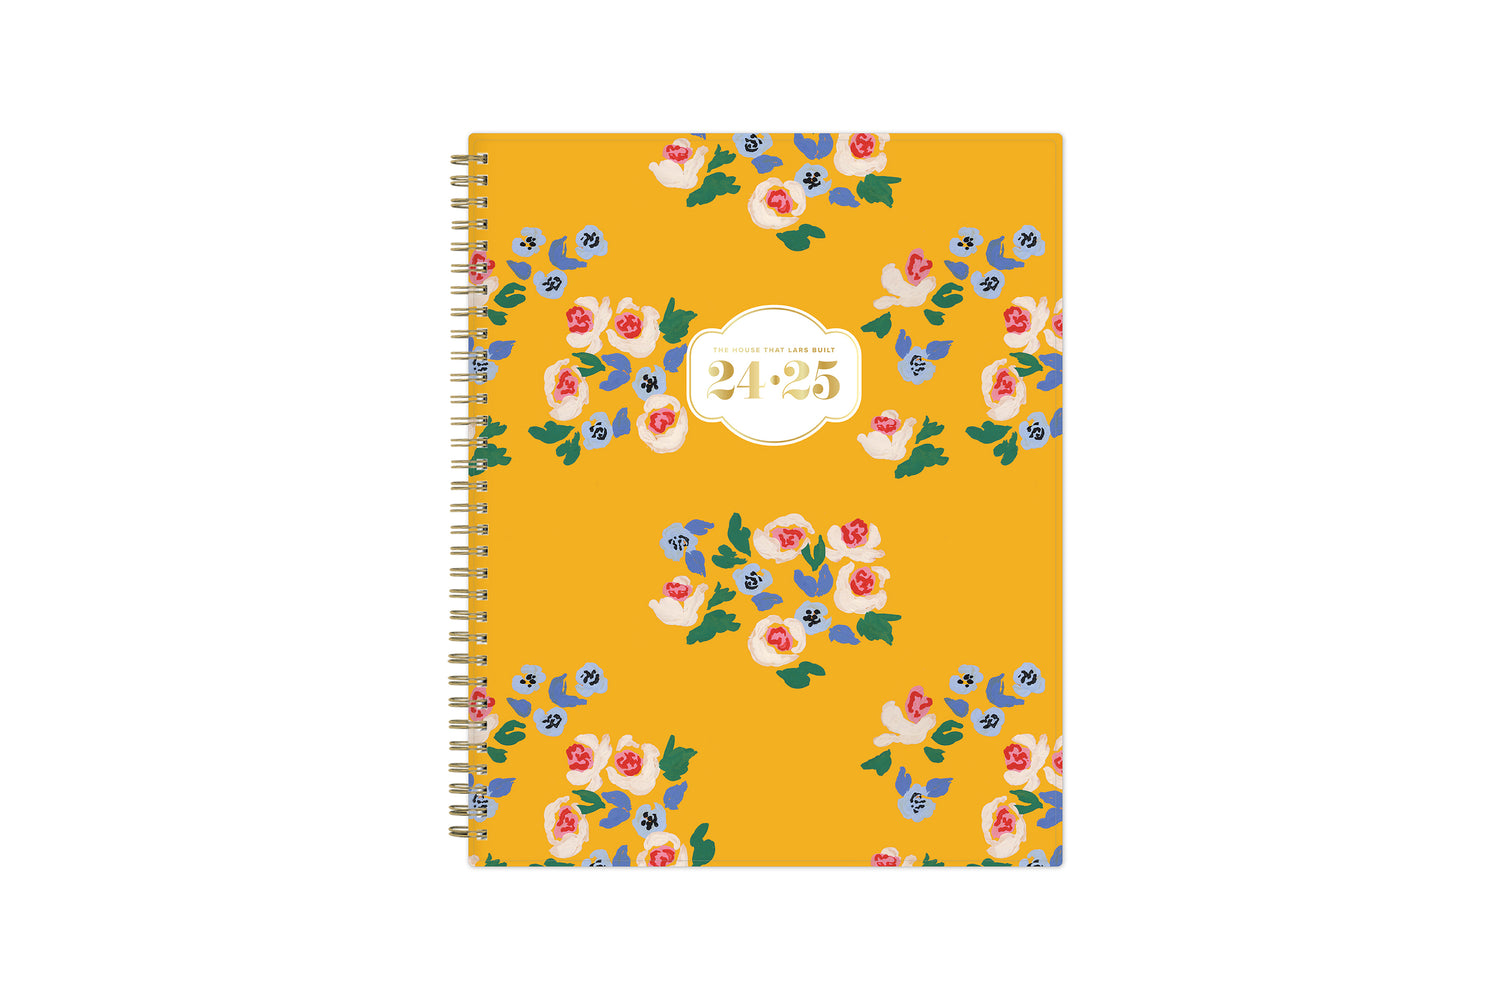 brushed floral pattern with gold yellow background